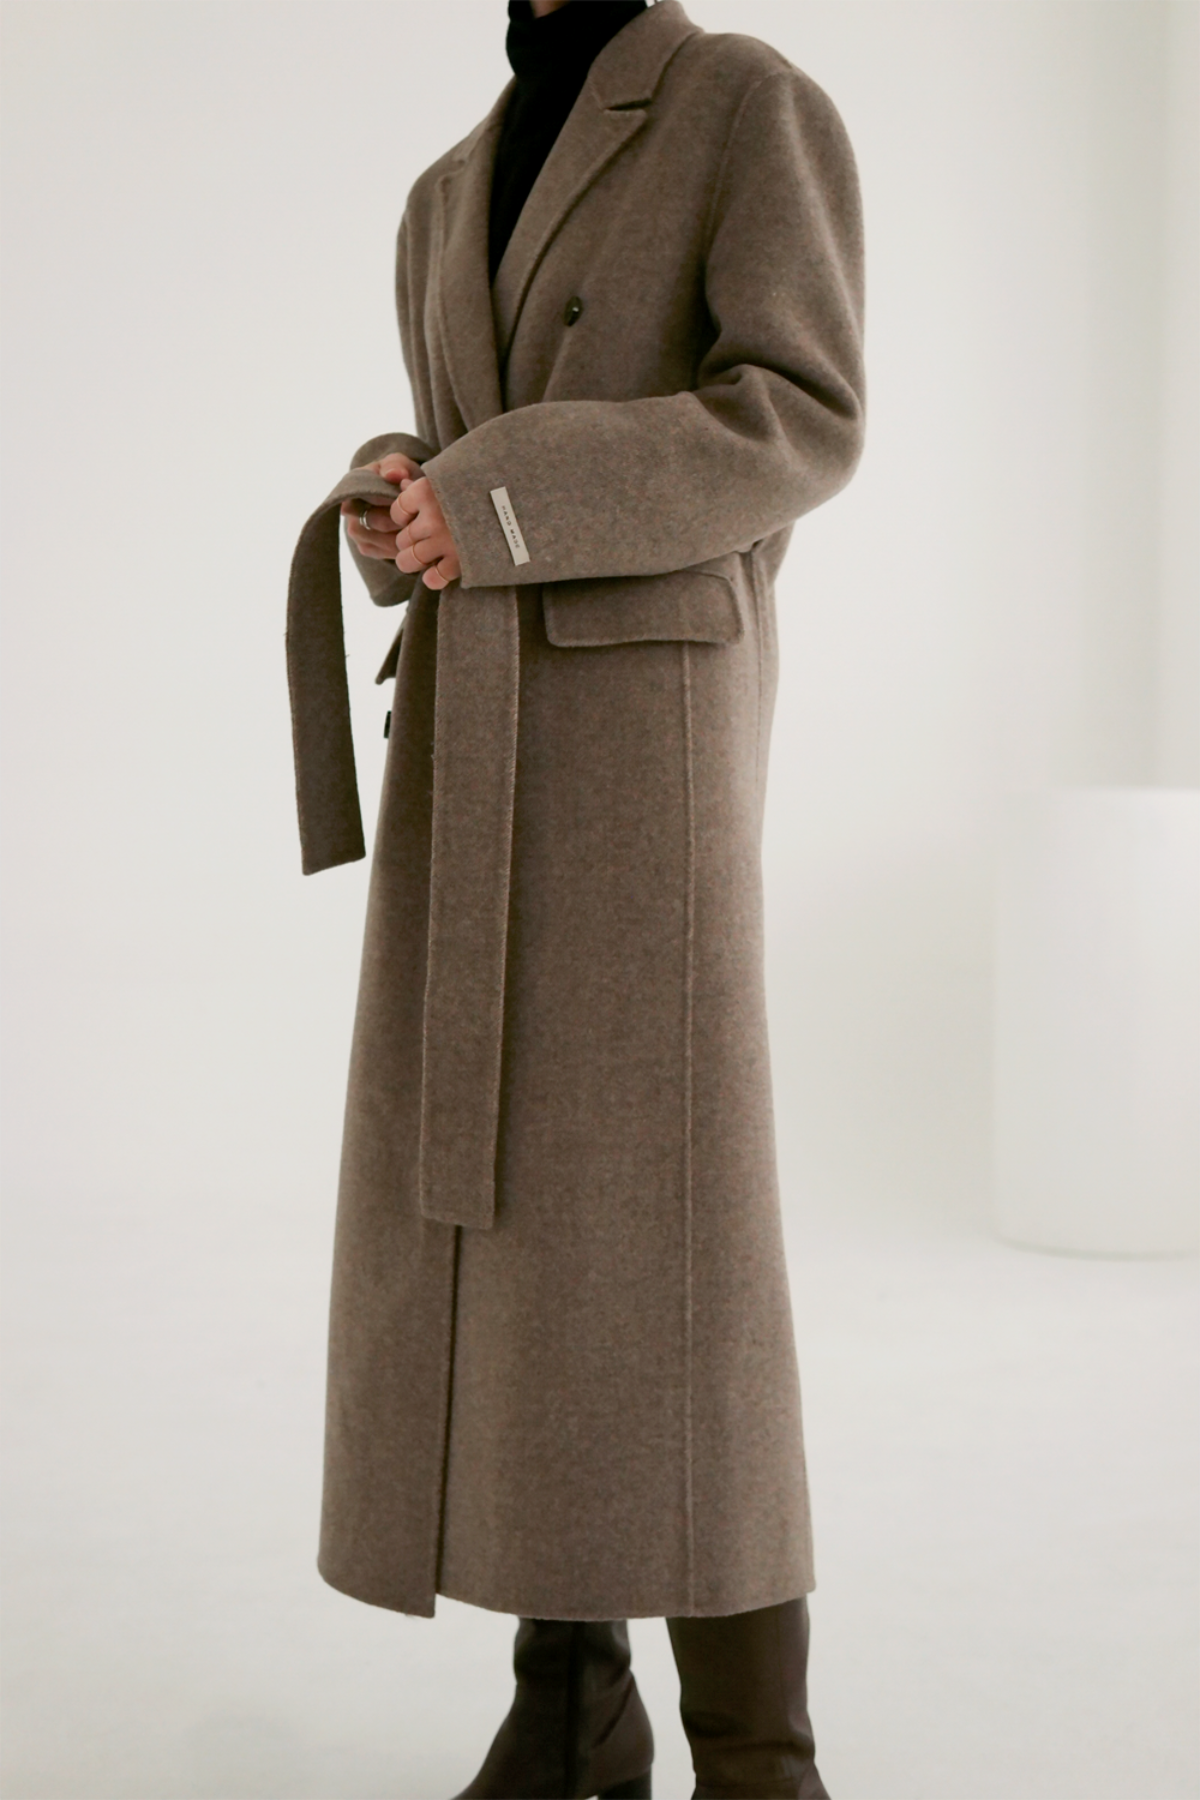 ANTHÈSE vello double long coat, oatmeal brown